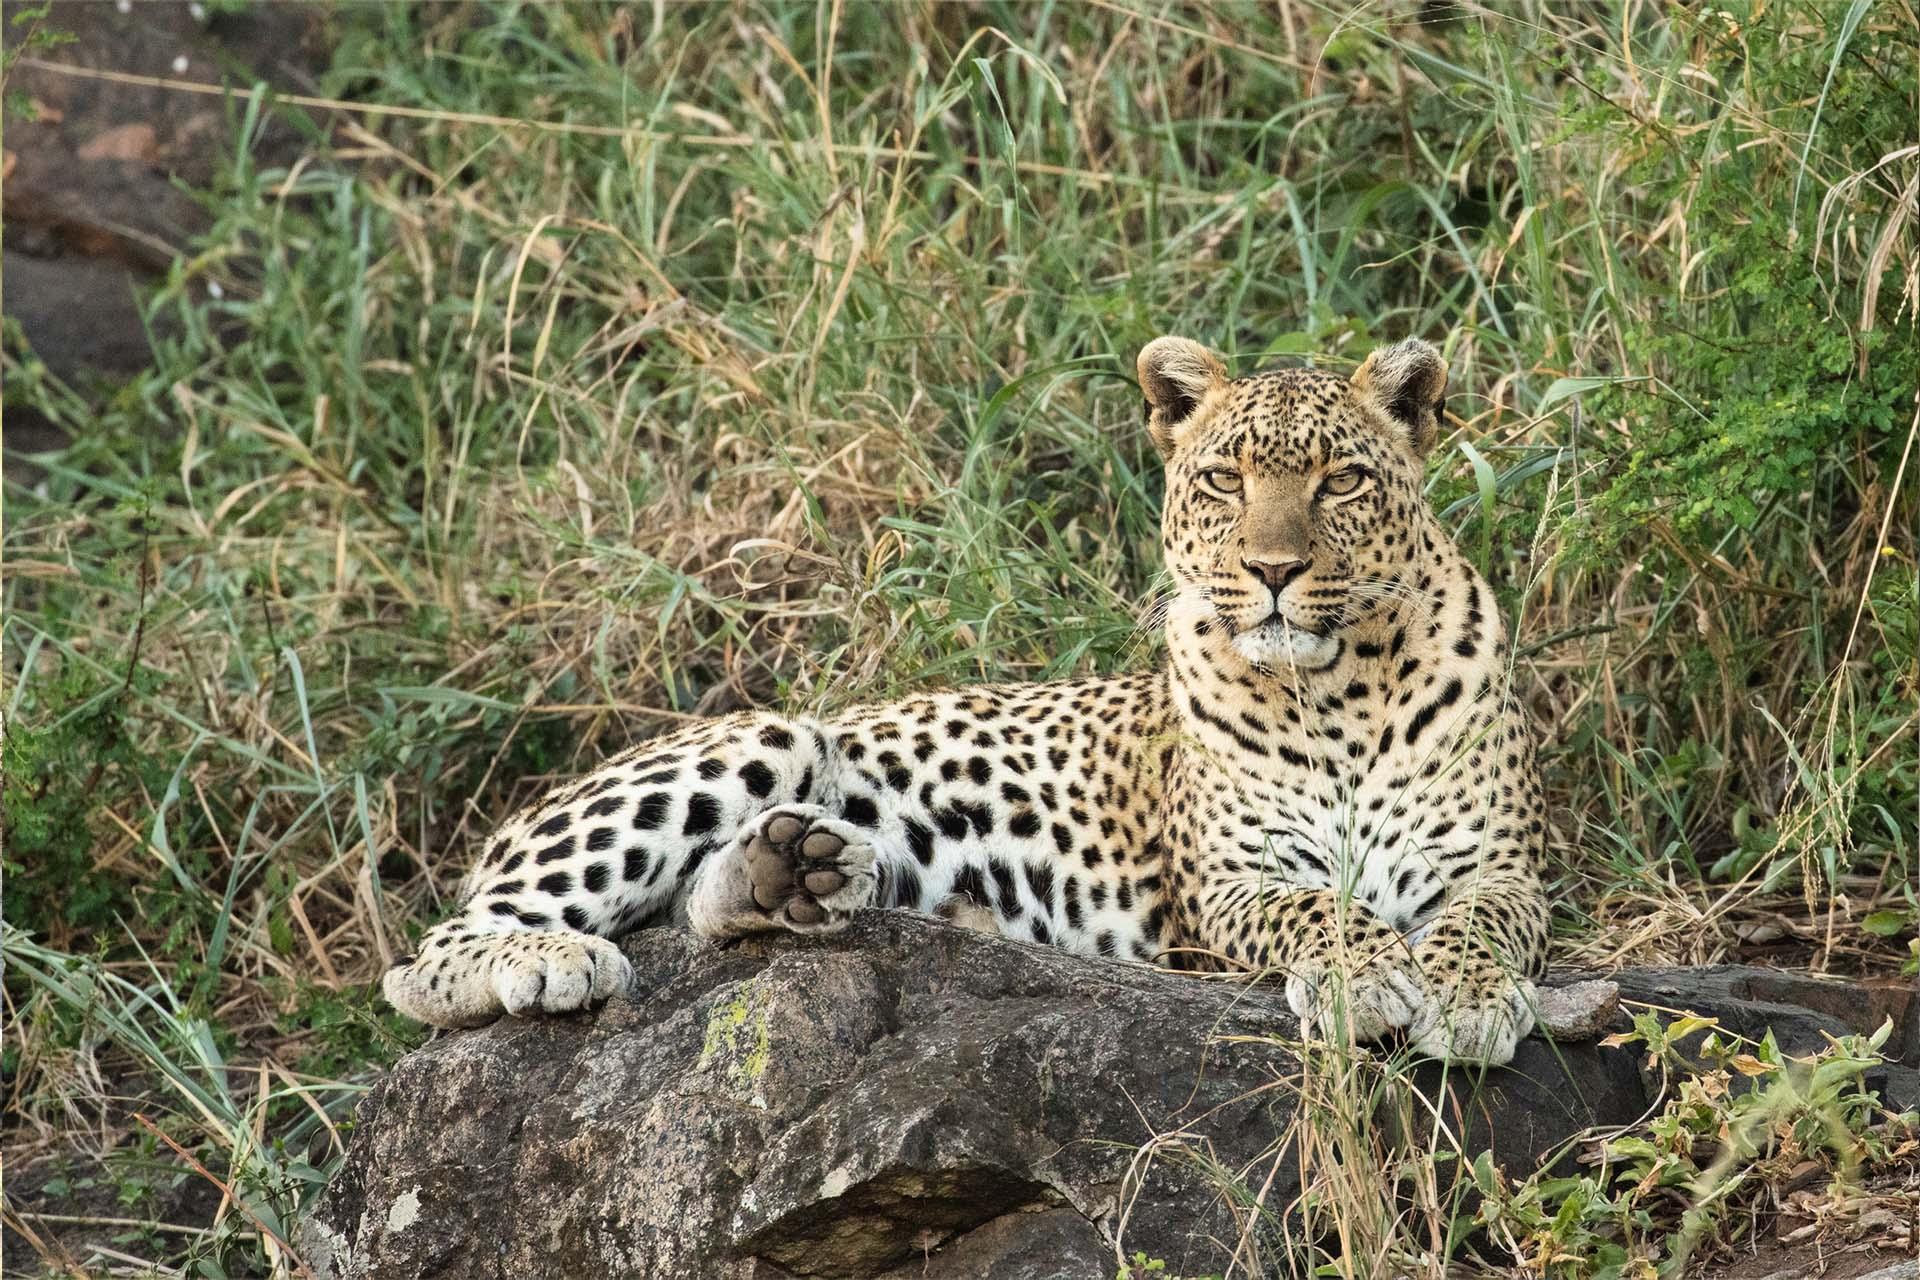 It is listed as Vulnerable on the IUCN Red List because leopard populations are threatened by habitat loss and fragmentation, and are declining in large parts of the global range\n